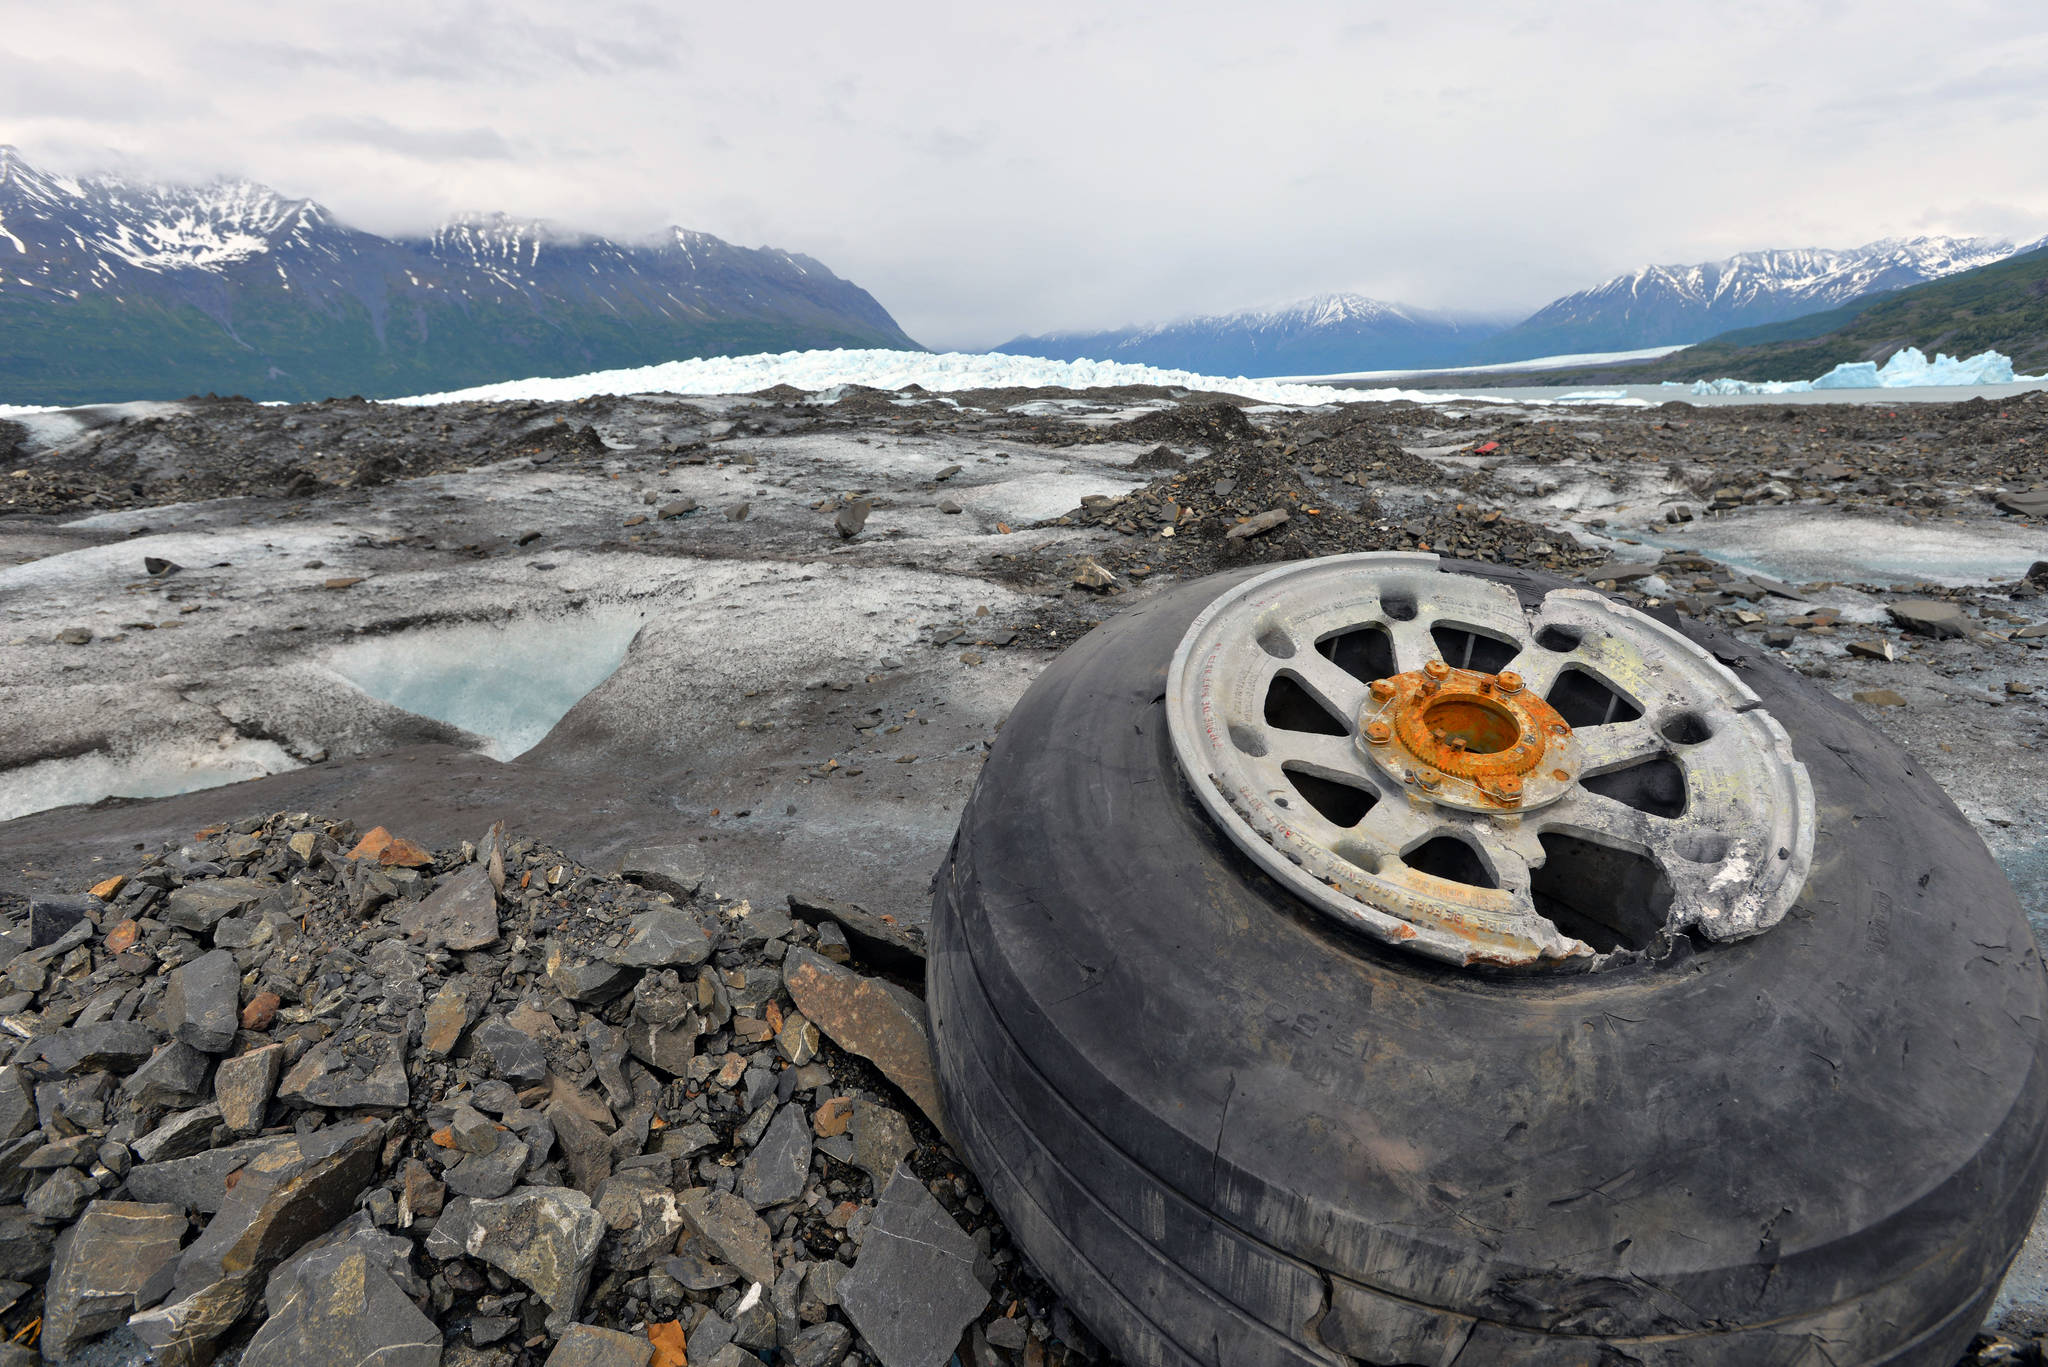 Landing gear from a 1952 C-124 Globemaster II aircraft accident rests on top of Colony Glacier June 10, 2015. Each summer since 2012 Alaskan Command has supported Operation Colony Glacier by removing aircraft debris and assisting in the recovery of human remains to ensure closure for families who have lost loved ones. (U.S. Air Force photo | Tech. Sgt. John Gordinier)